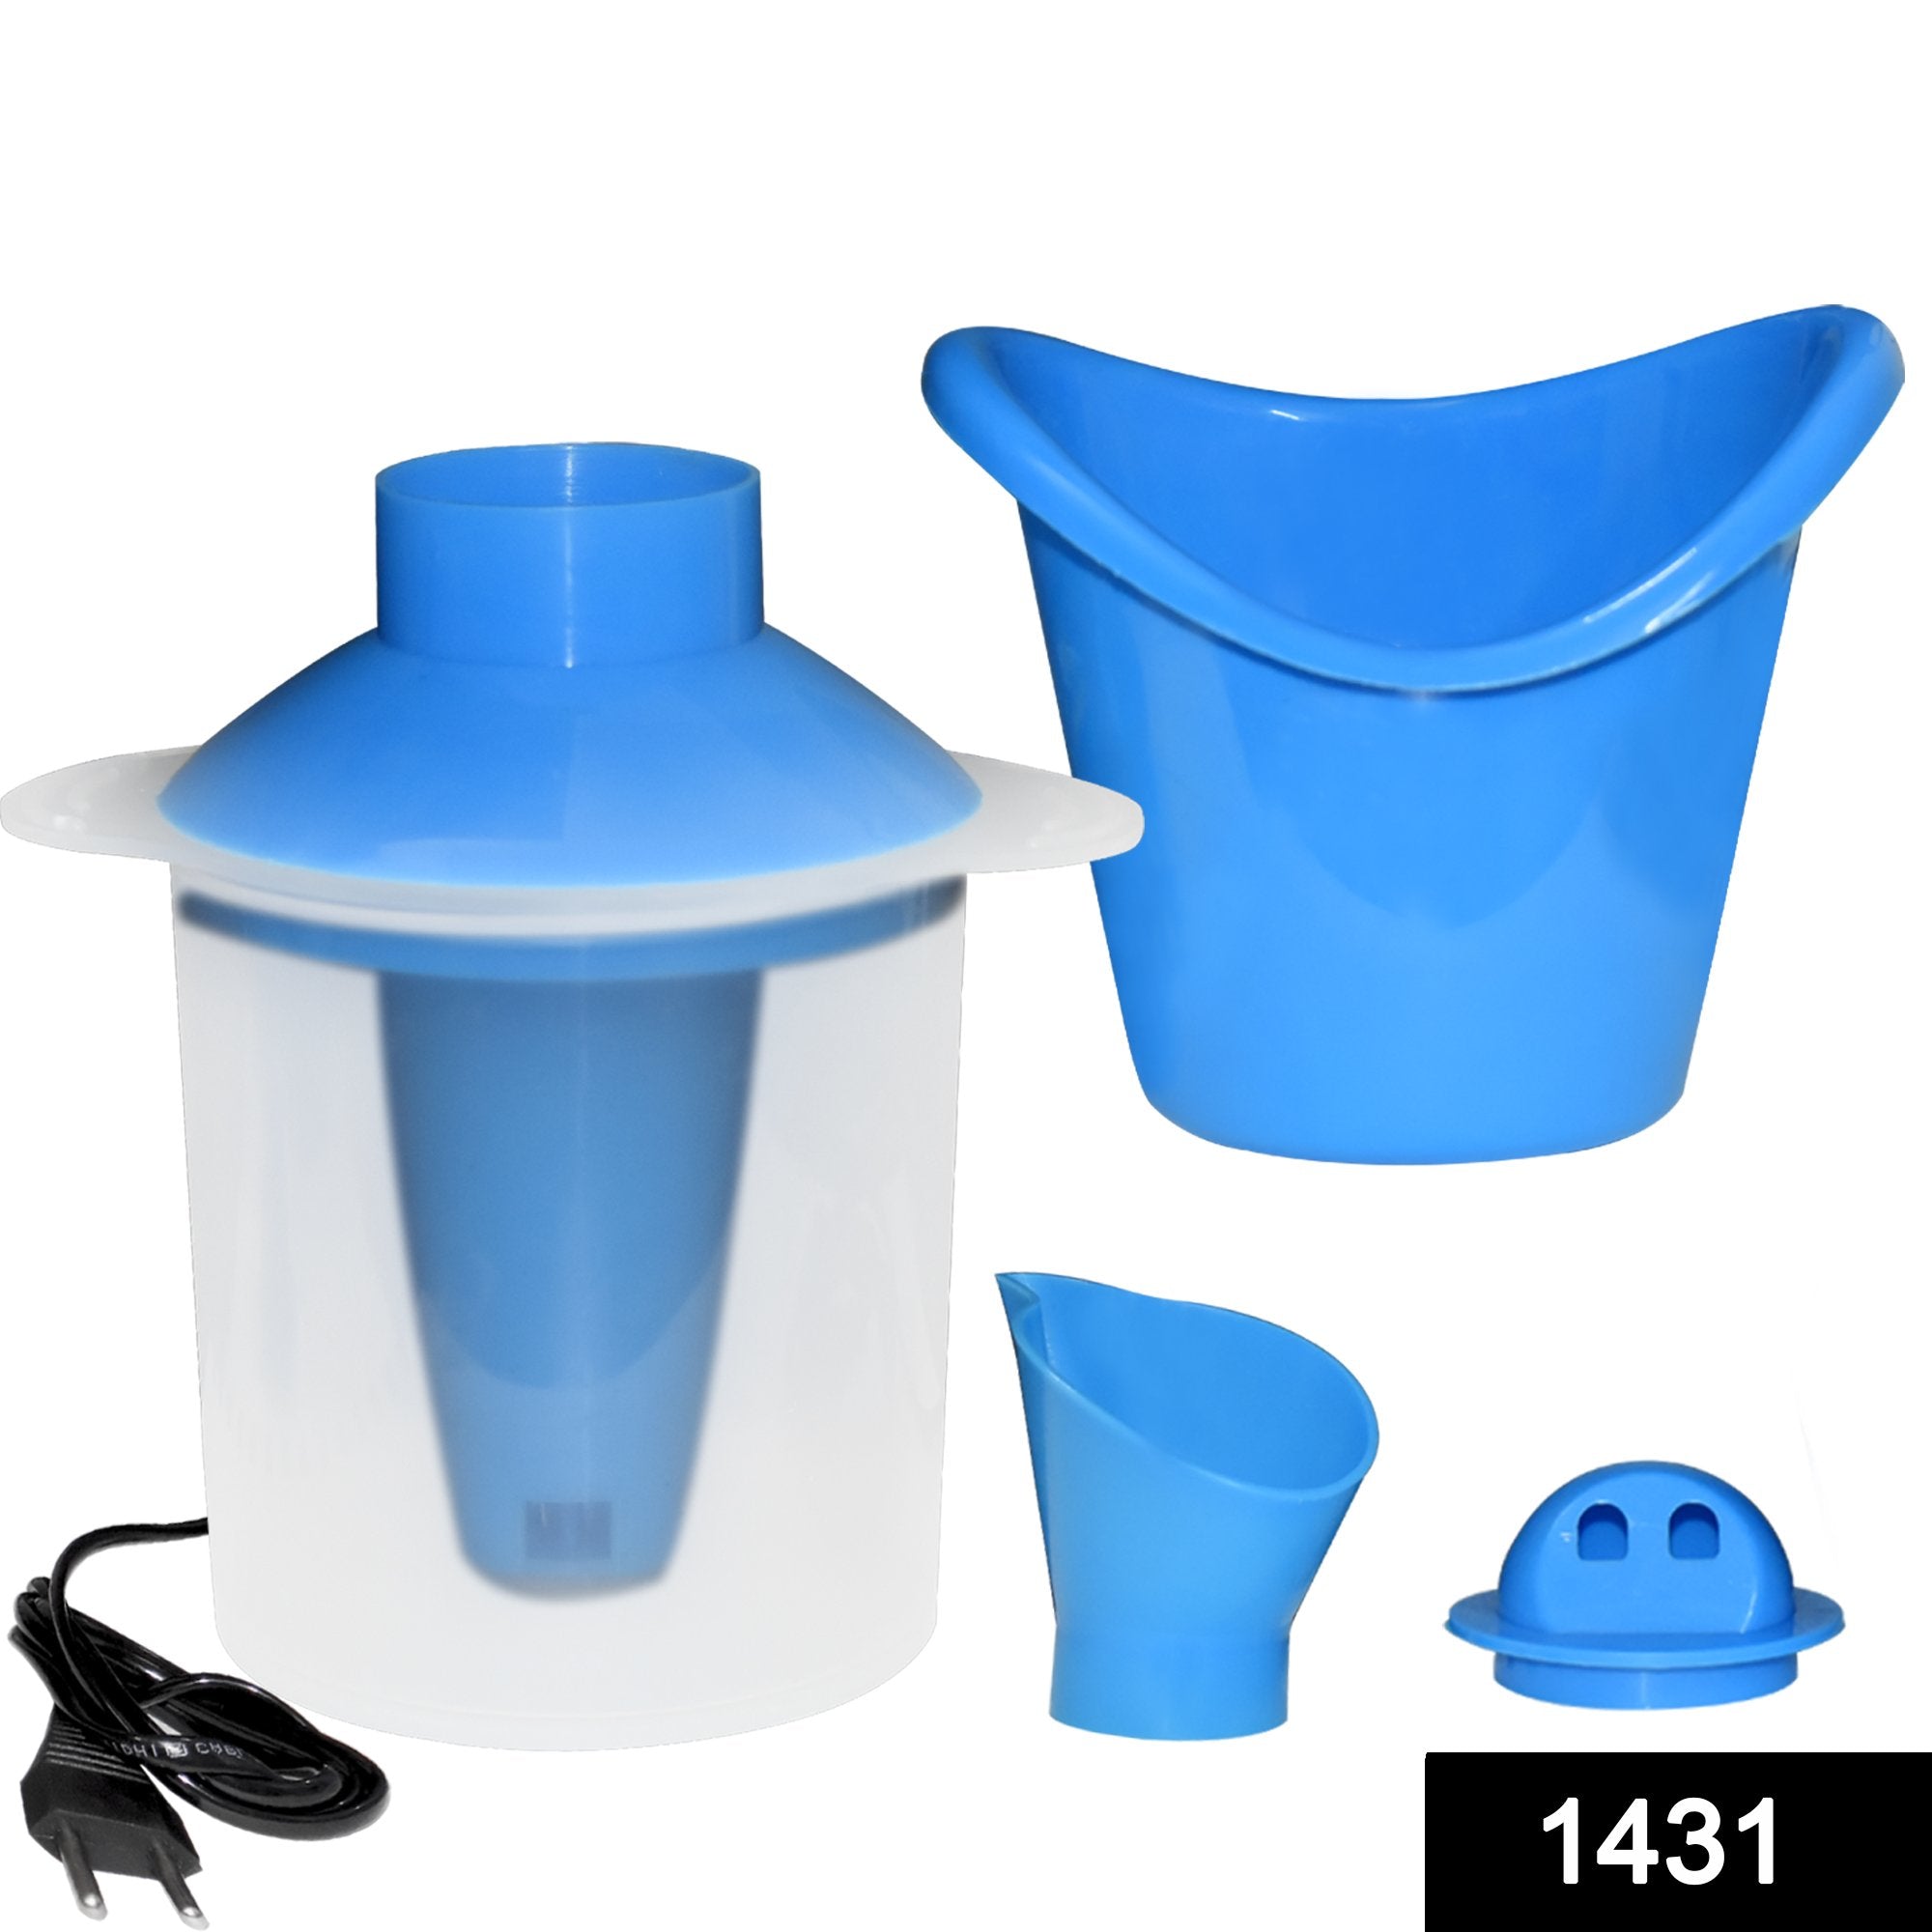 1431 3 in 1 Vaporiser steamer for cough and cold - SkyShopy